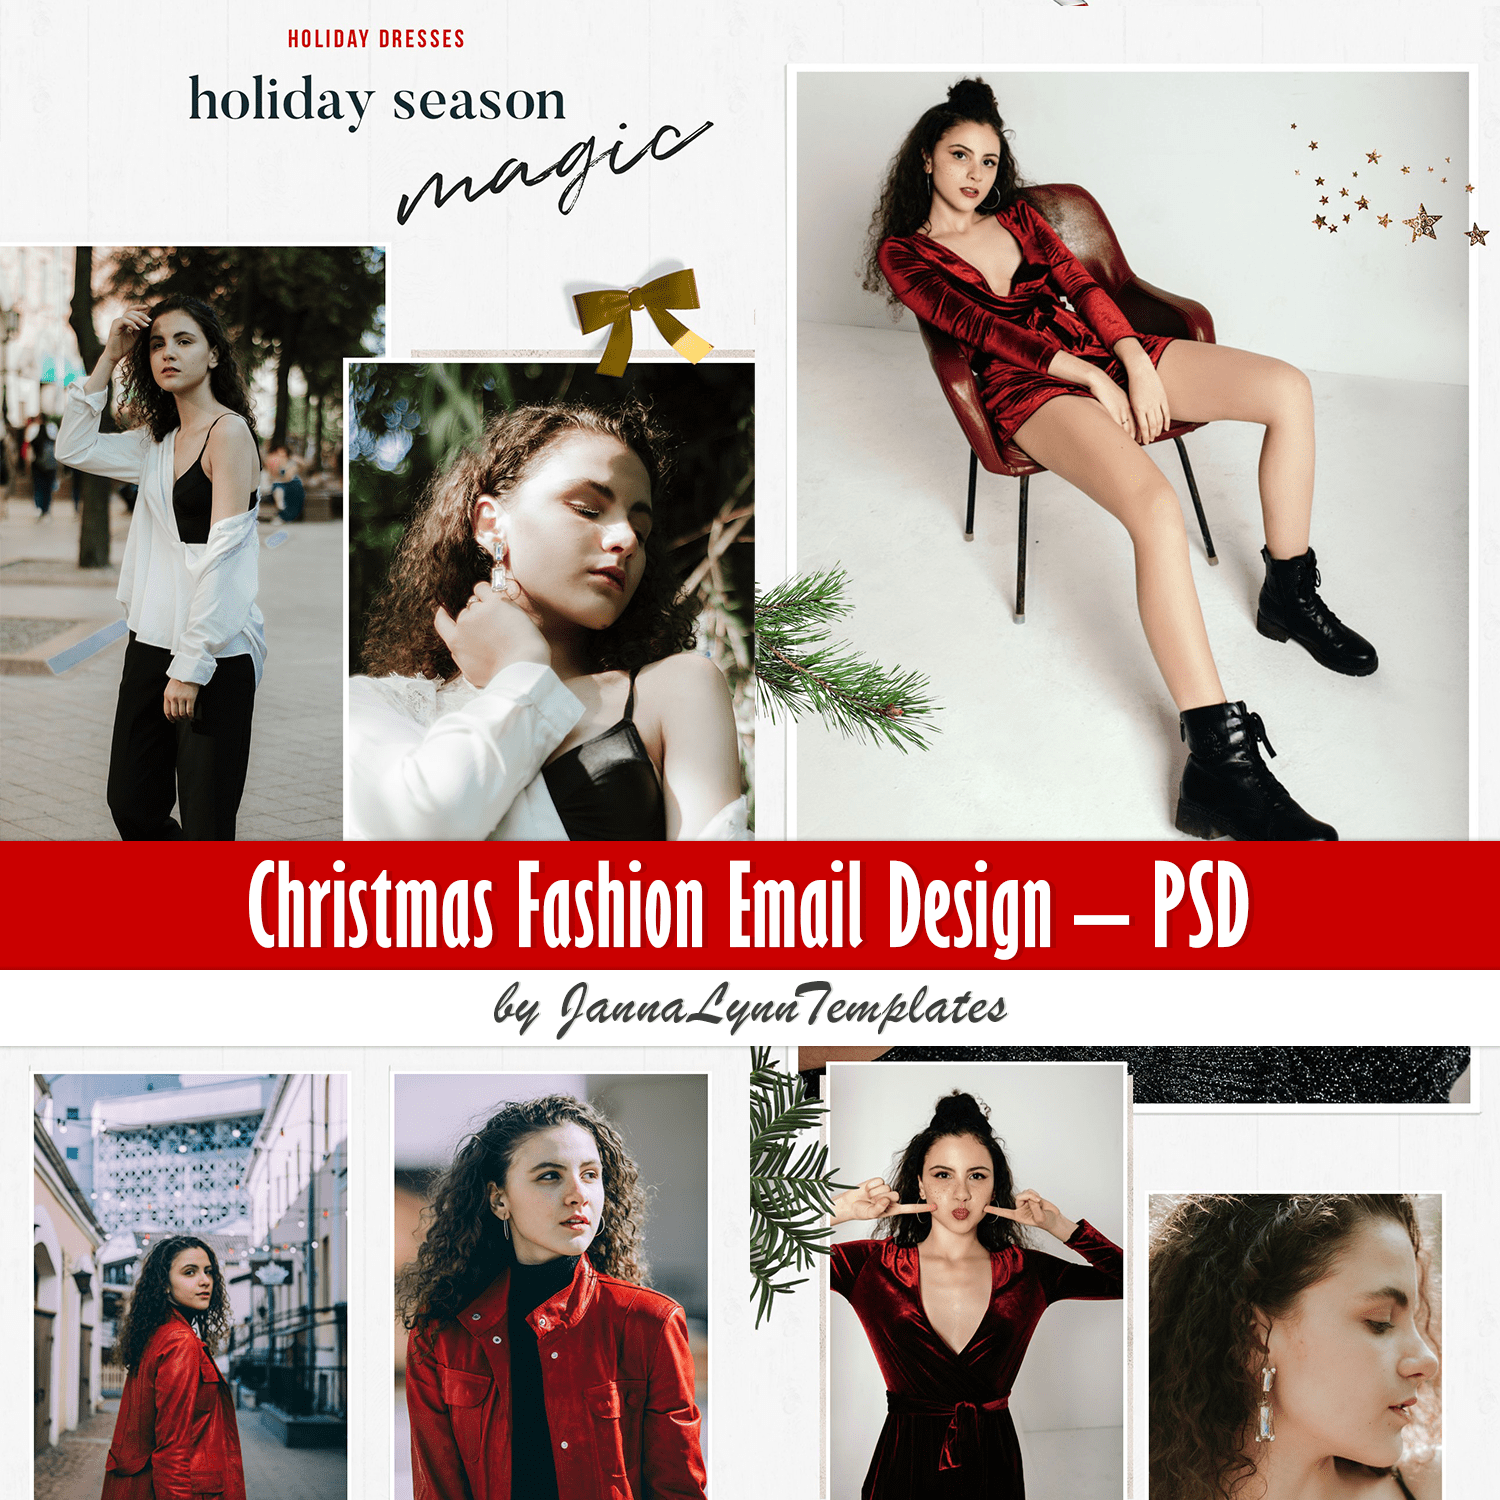 Image collection of amazing christmas fashion themed email design template.